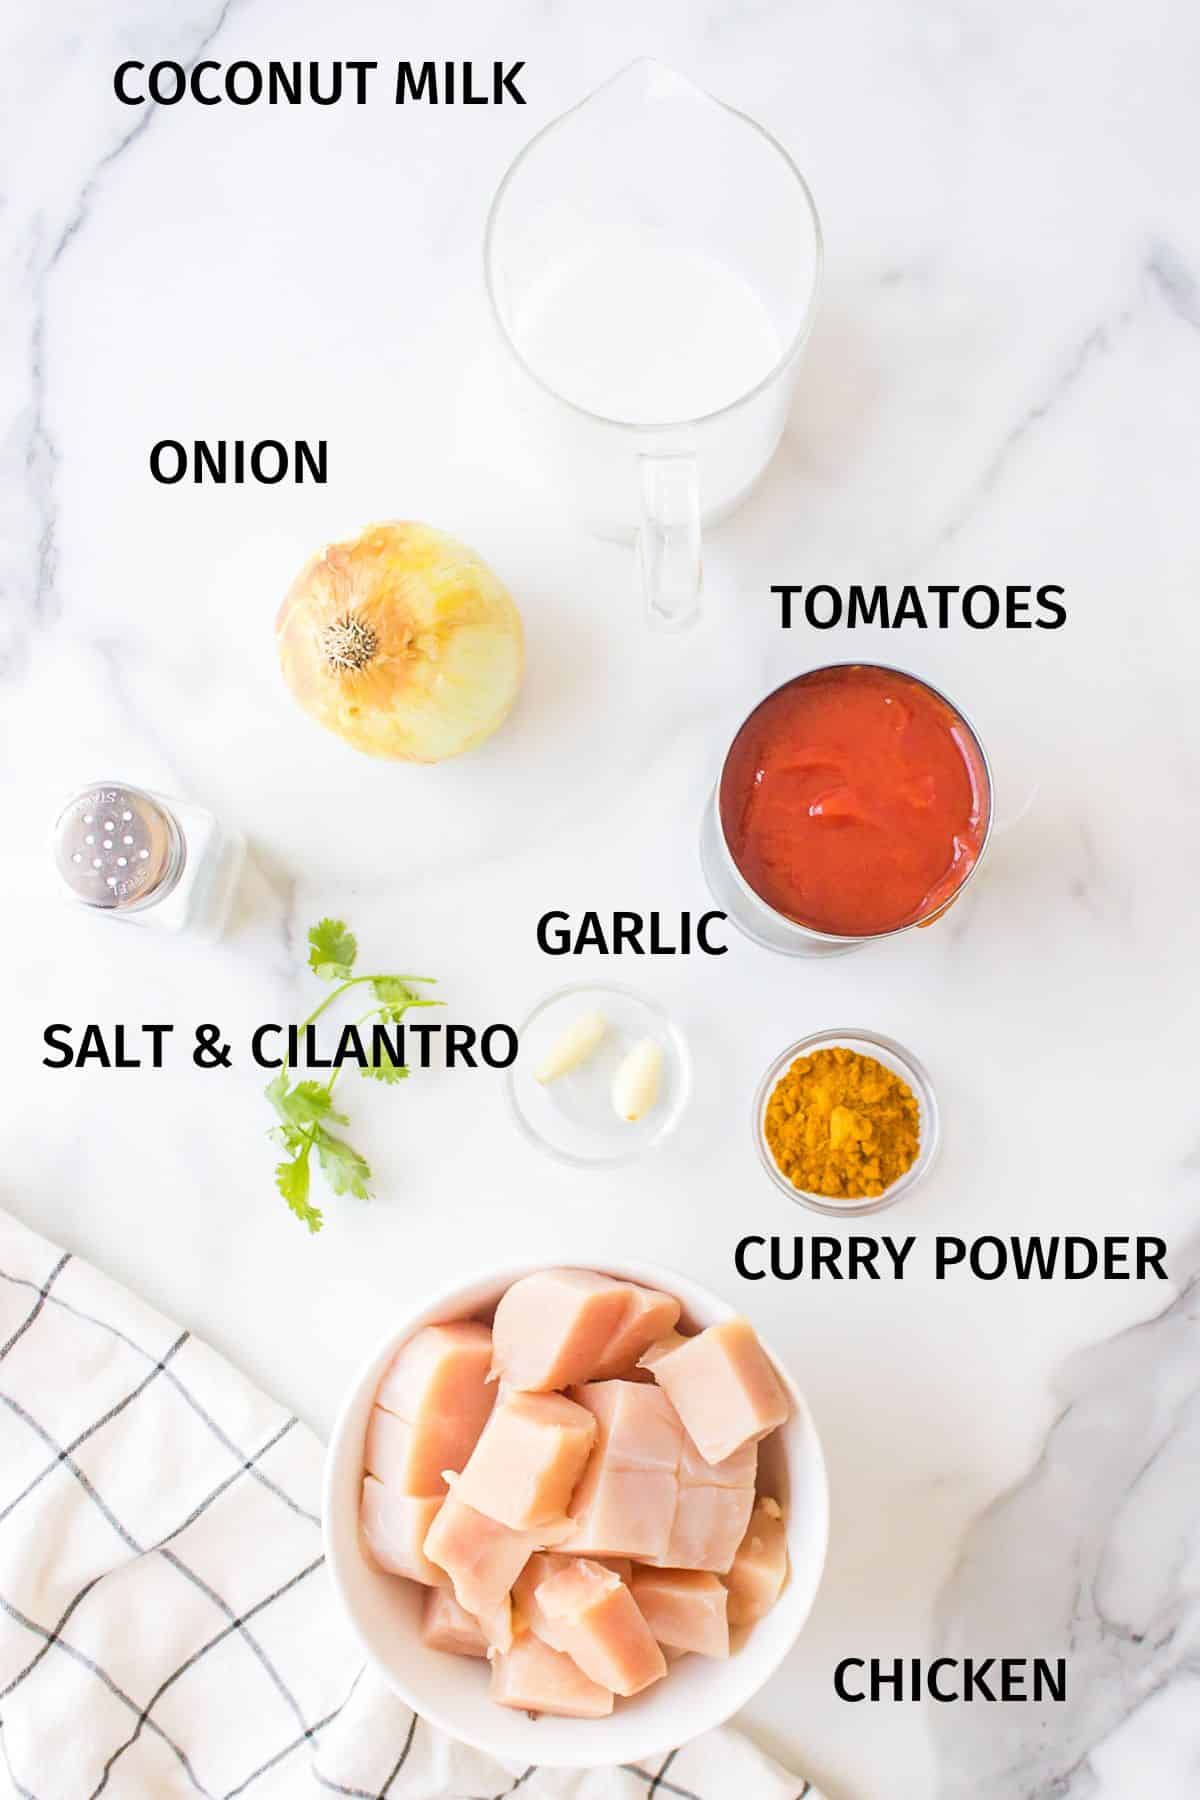 Ingredients to make simple chicken curry in small bowls on a white surface.